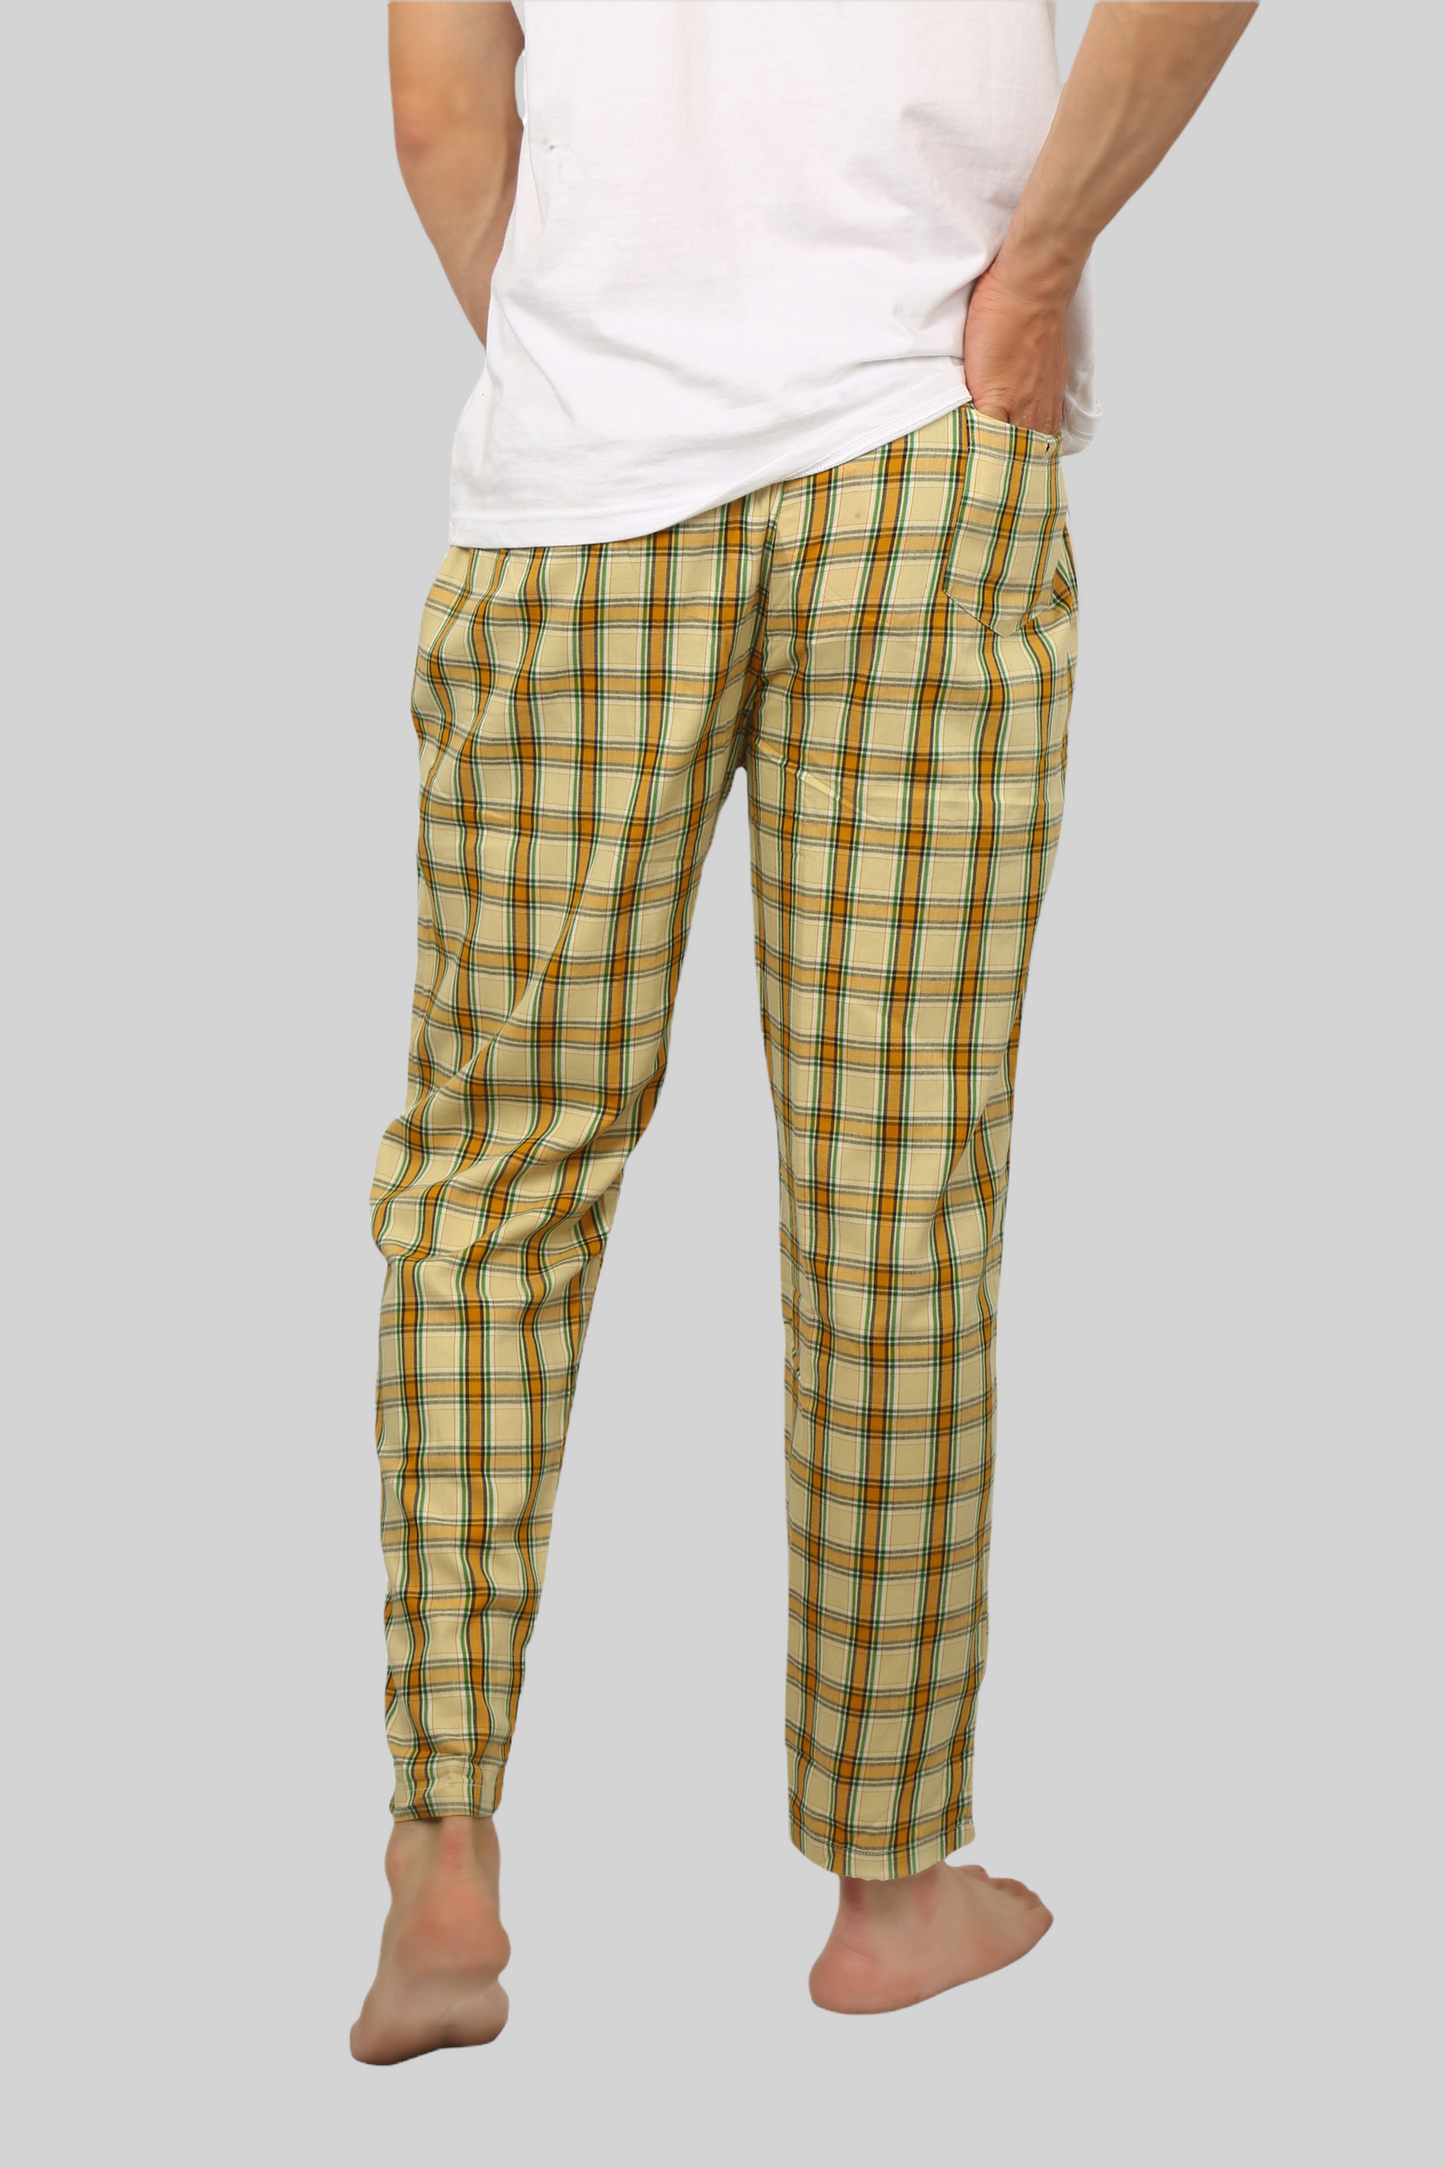 Beige soft and super comfortable checkered pajamas for men